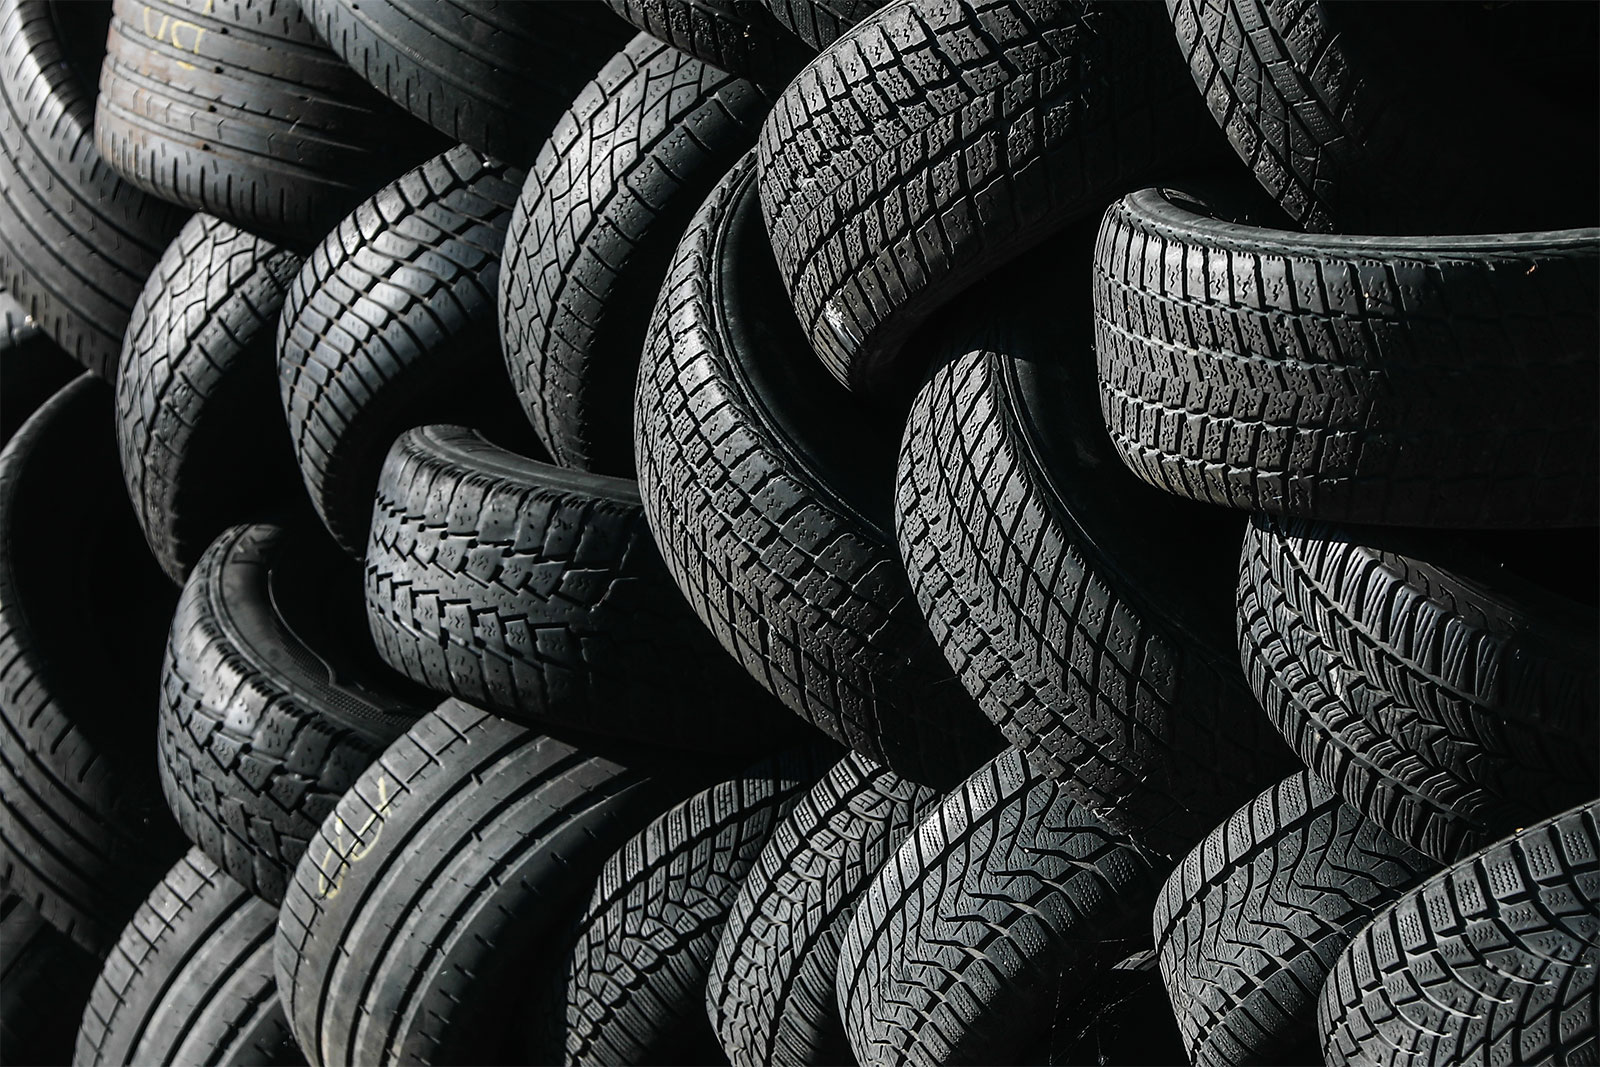 Close-up of a large stack of black car tires